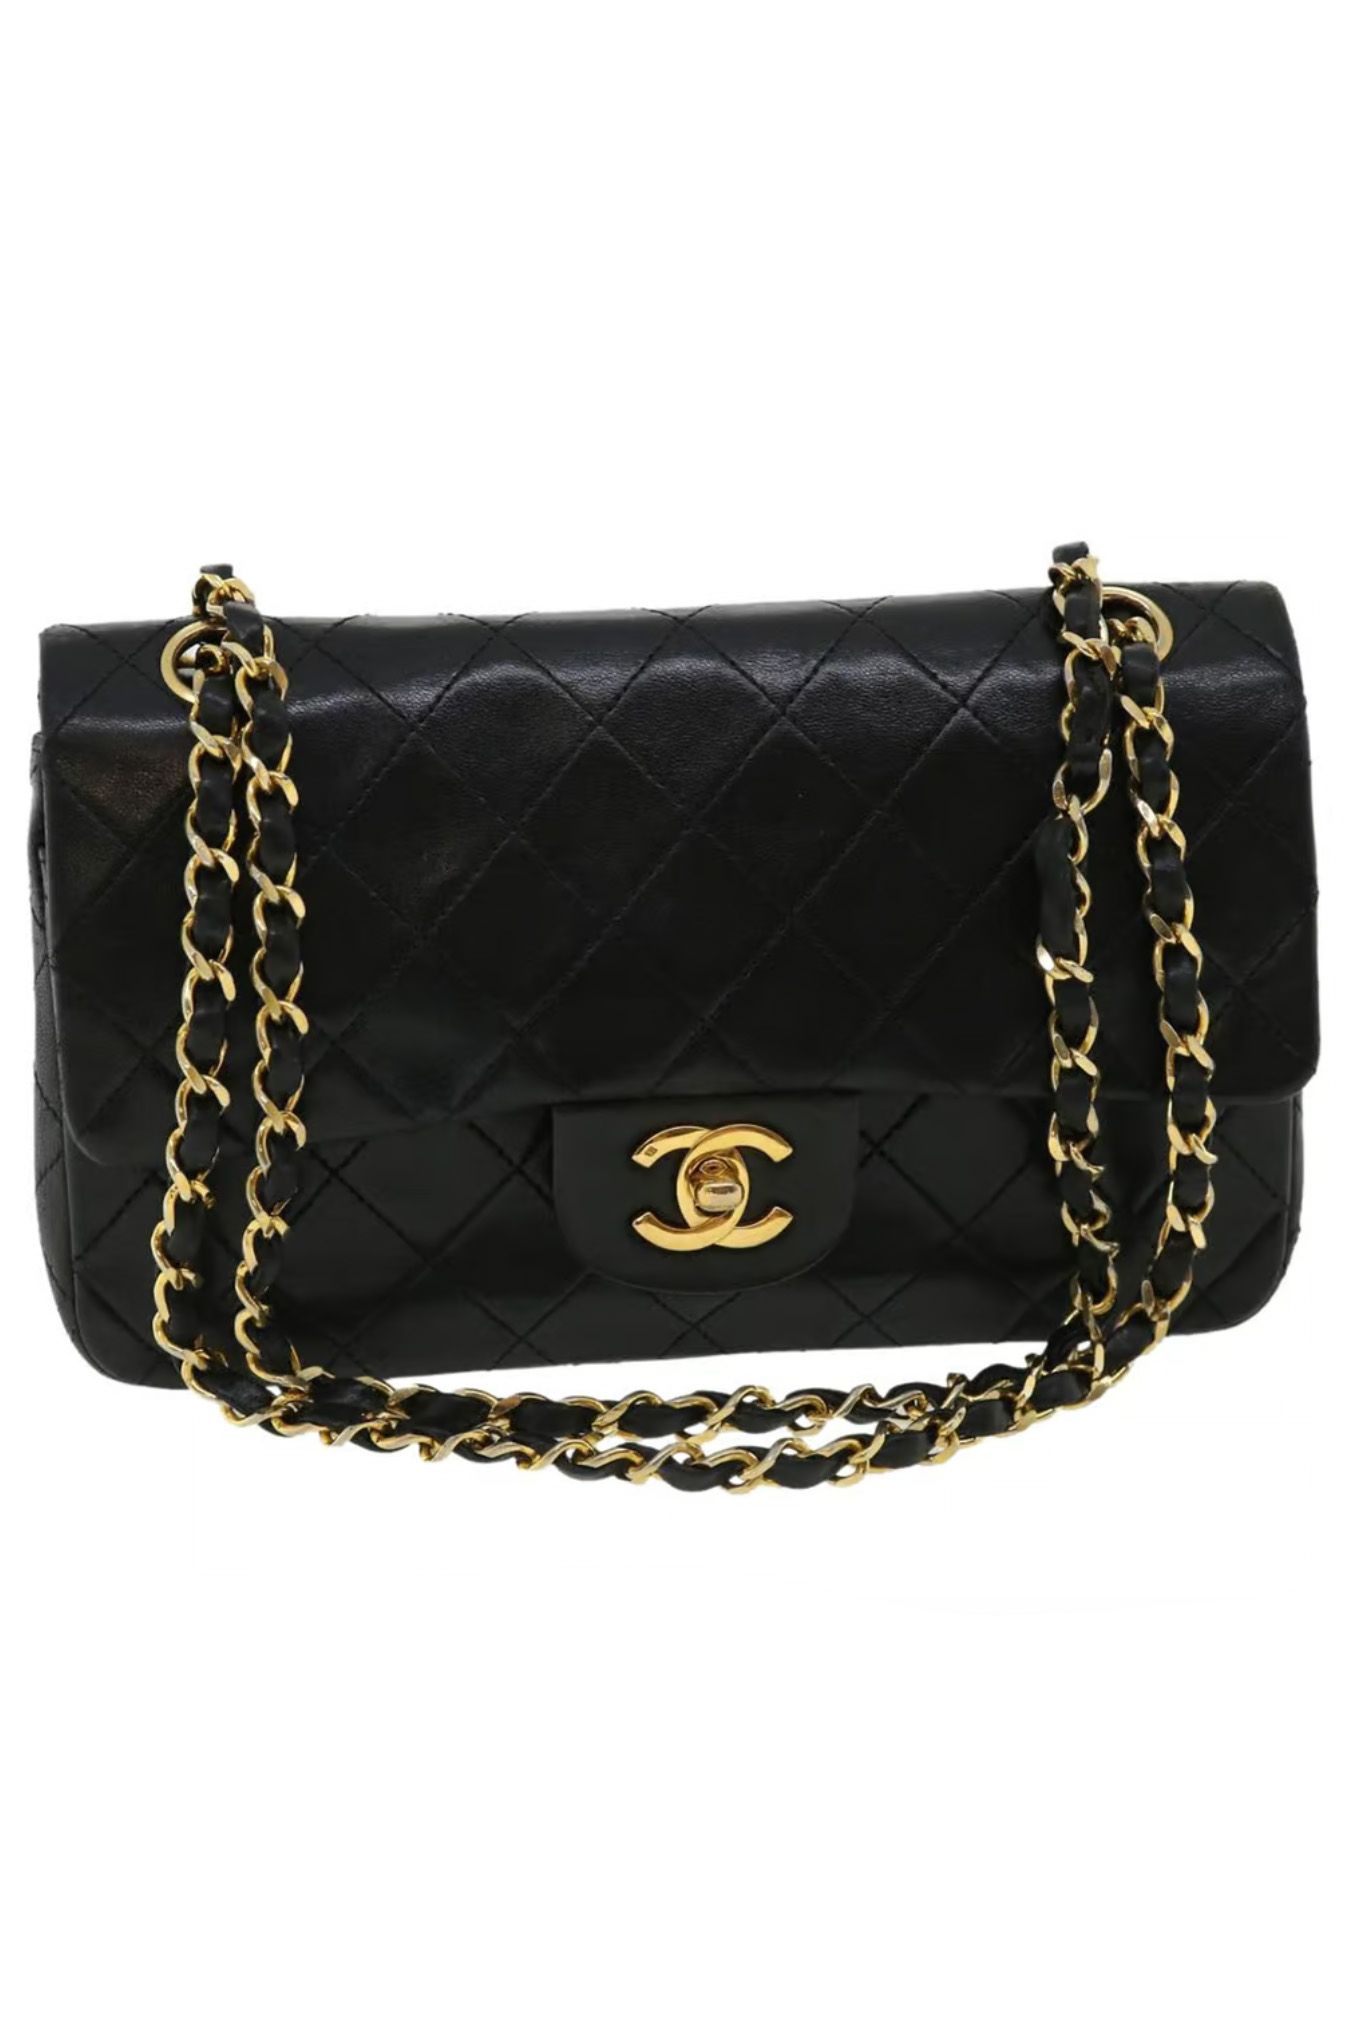 authentic chanel bags for women